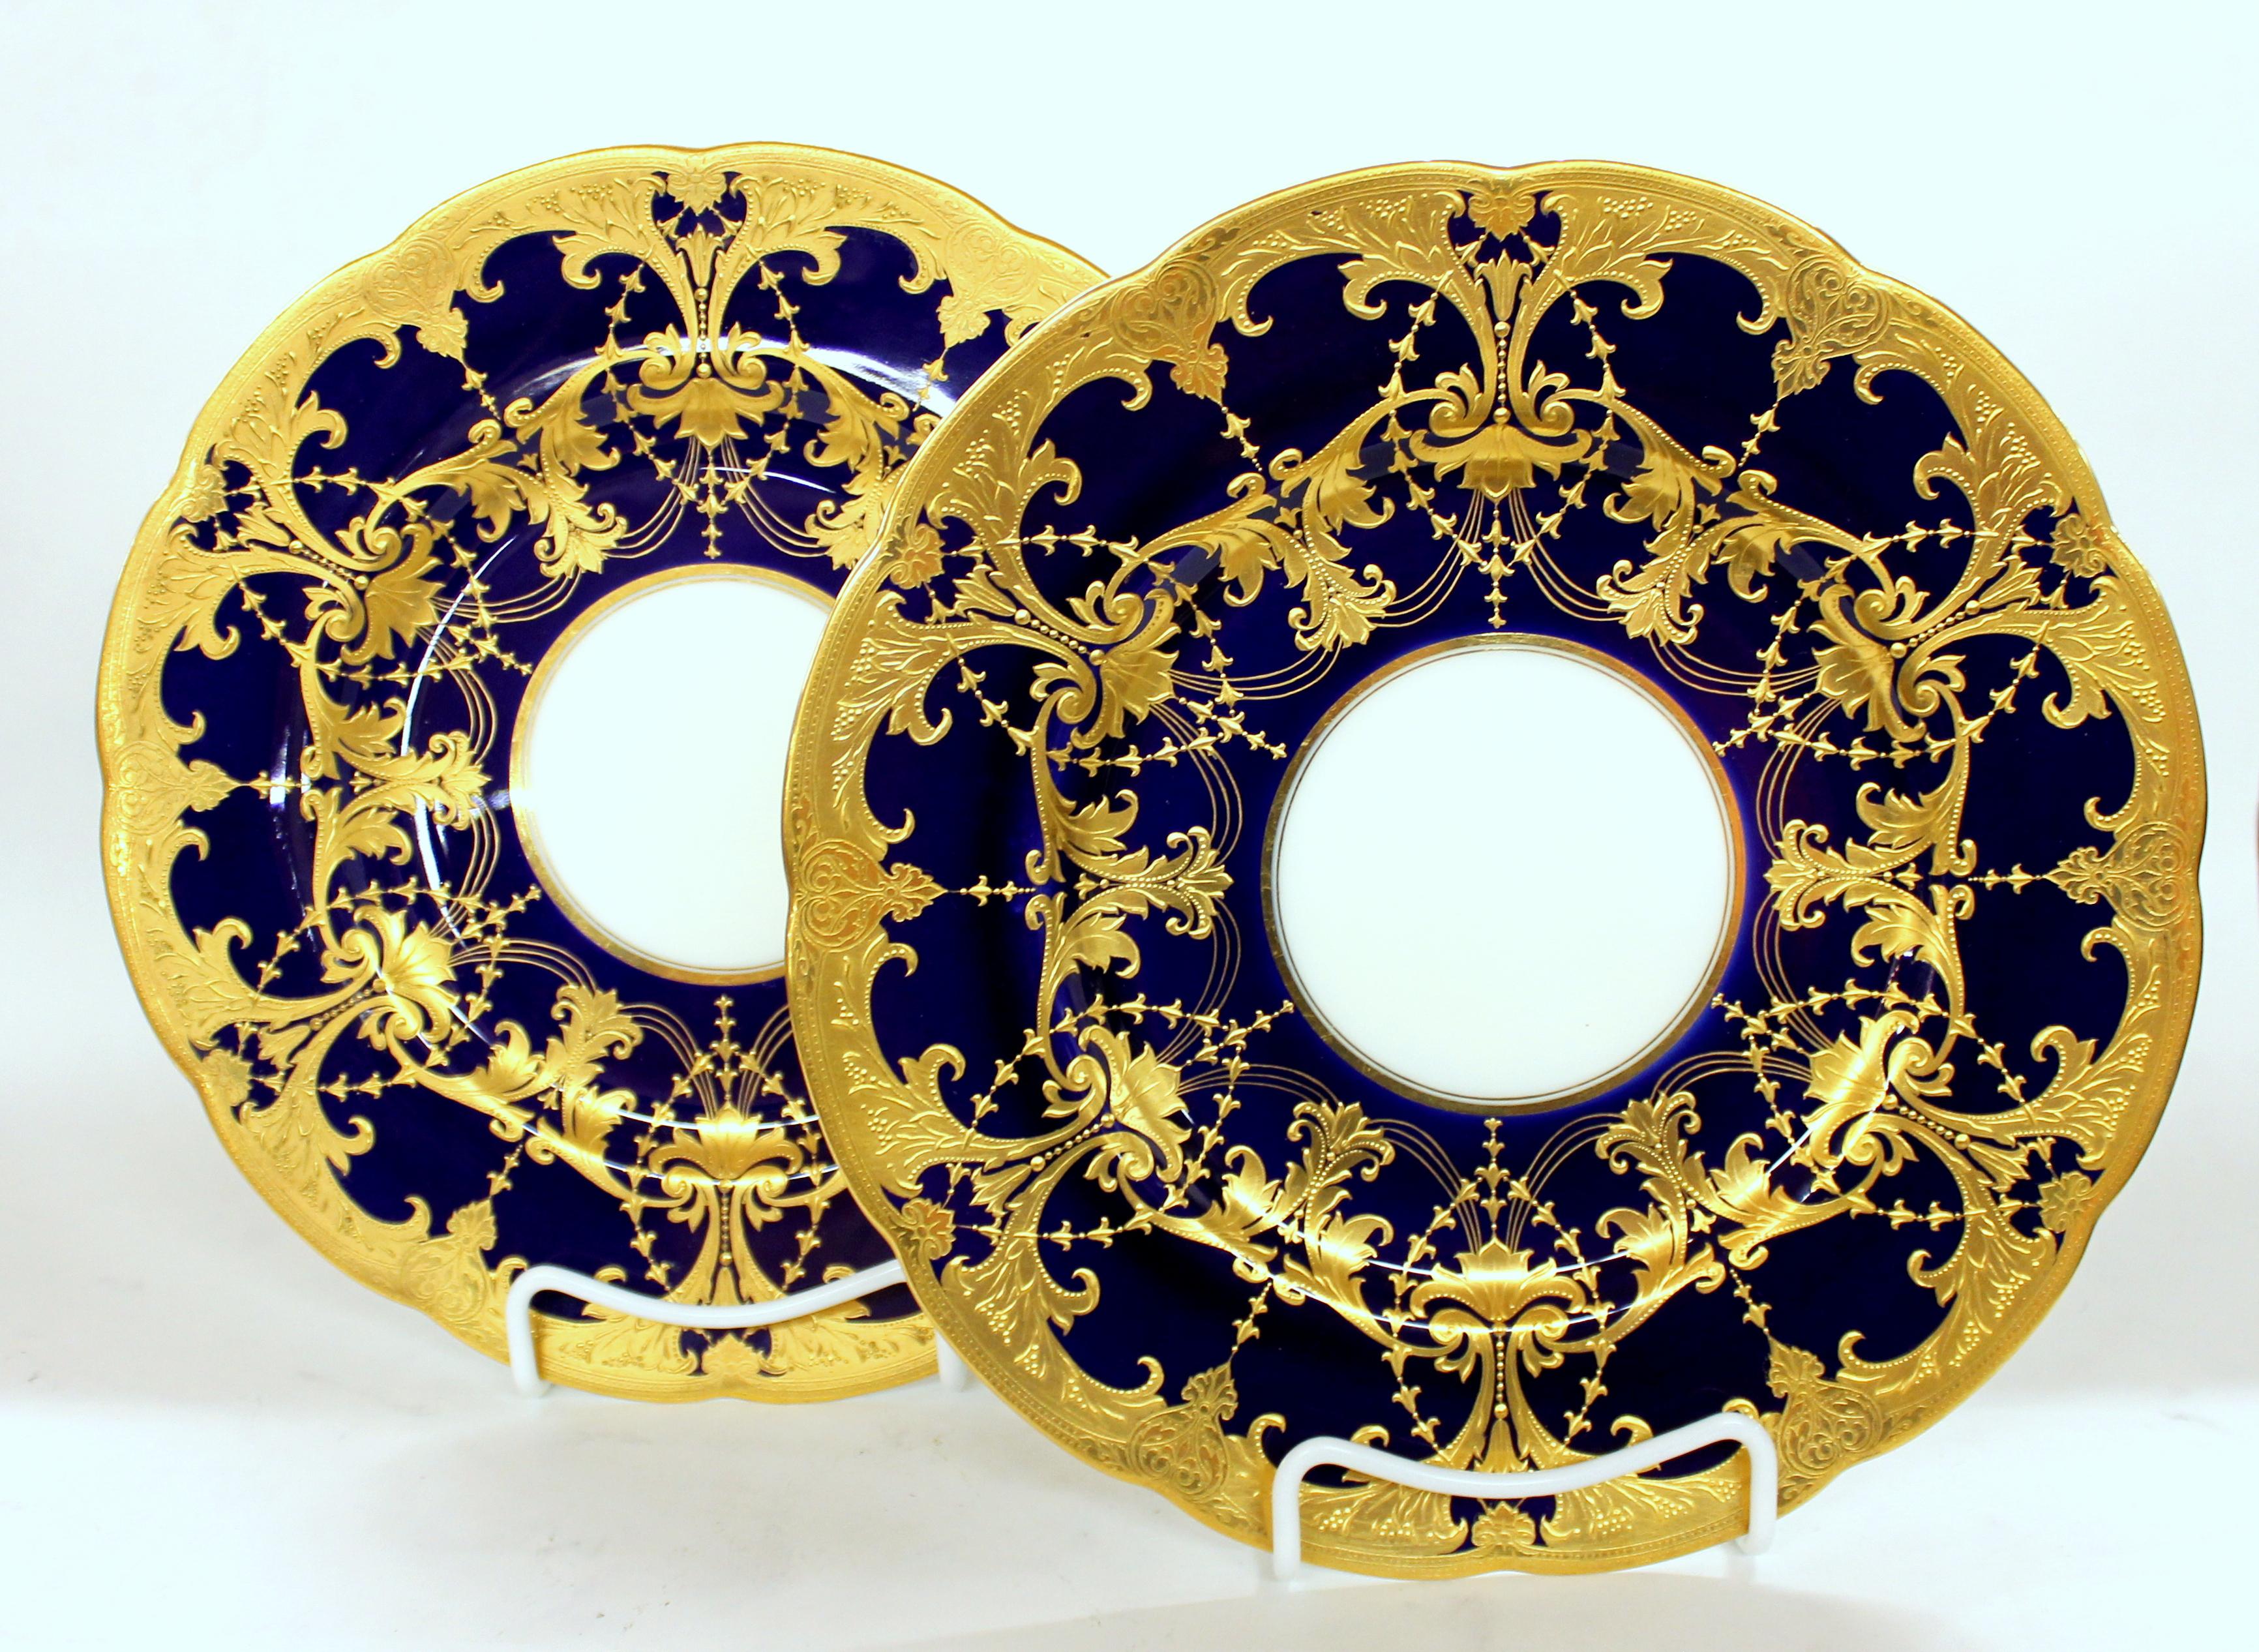 Pair of magnificent quality Old Minton hand gilt in bas relief and cobalt porcelain cabinet or service plates; possibly the most exceptional plates made in the first quarter of the 20th century. Many years ago, special commissioned Cabinet or